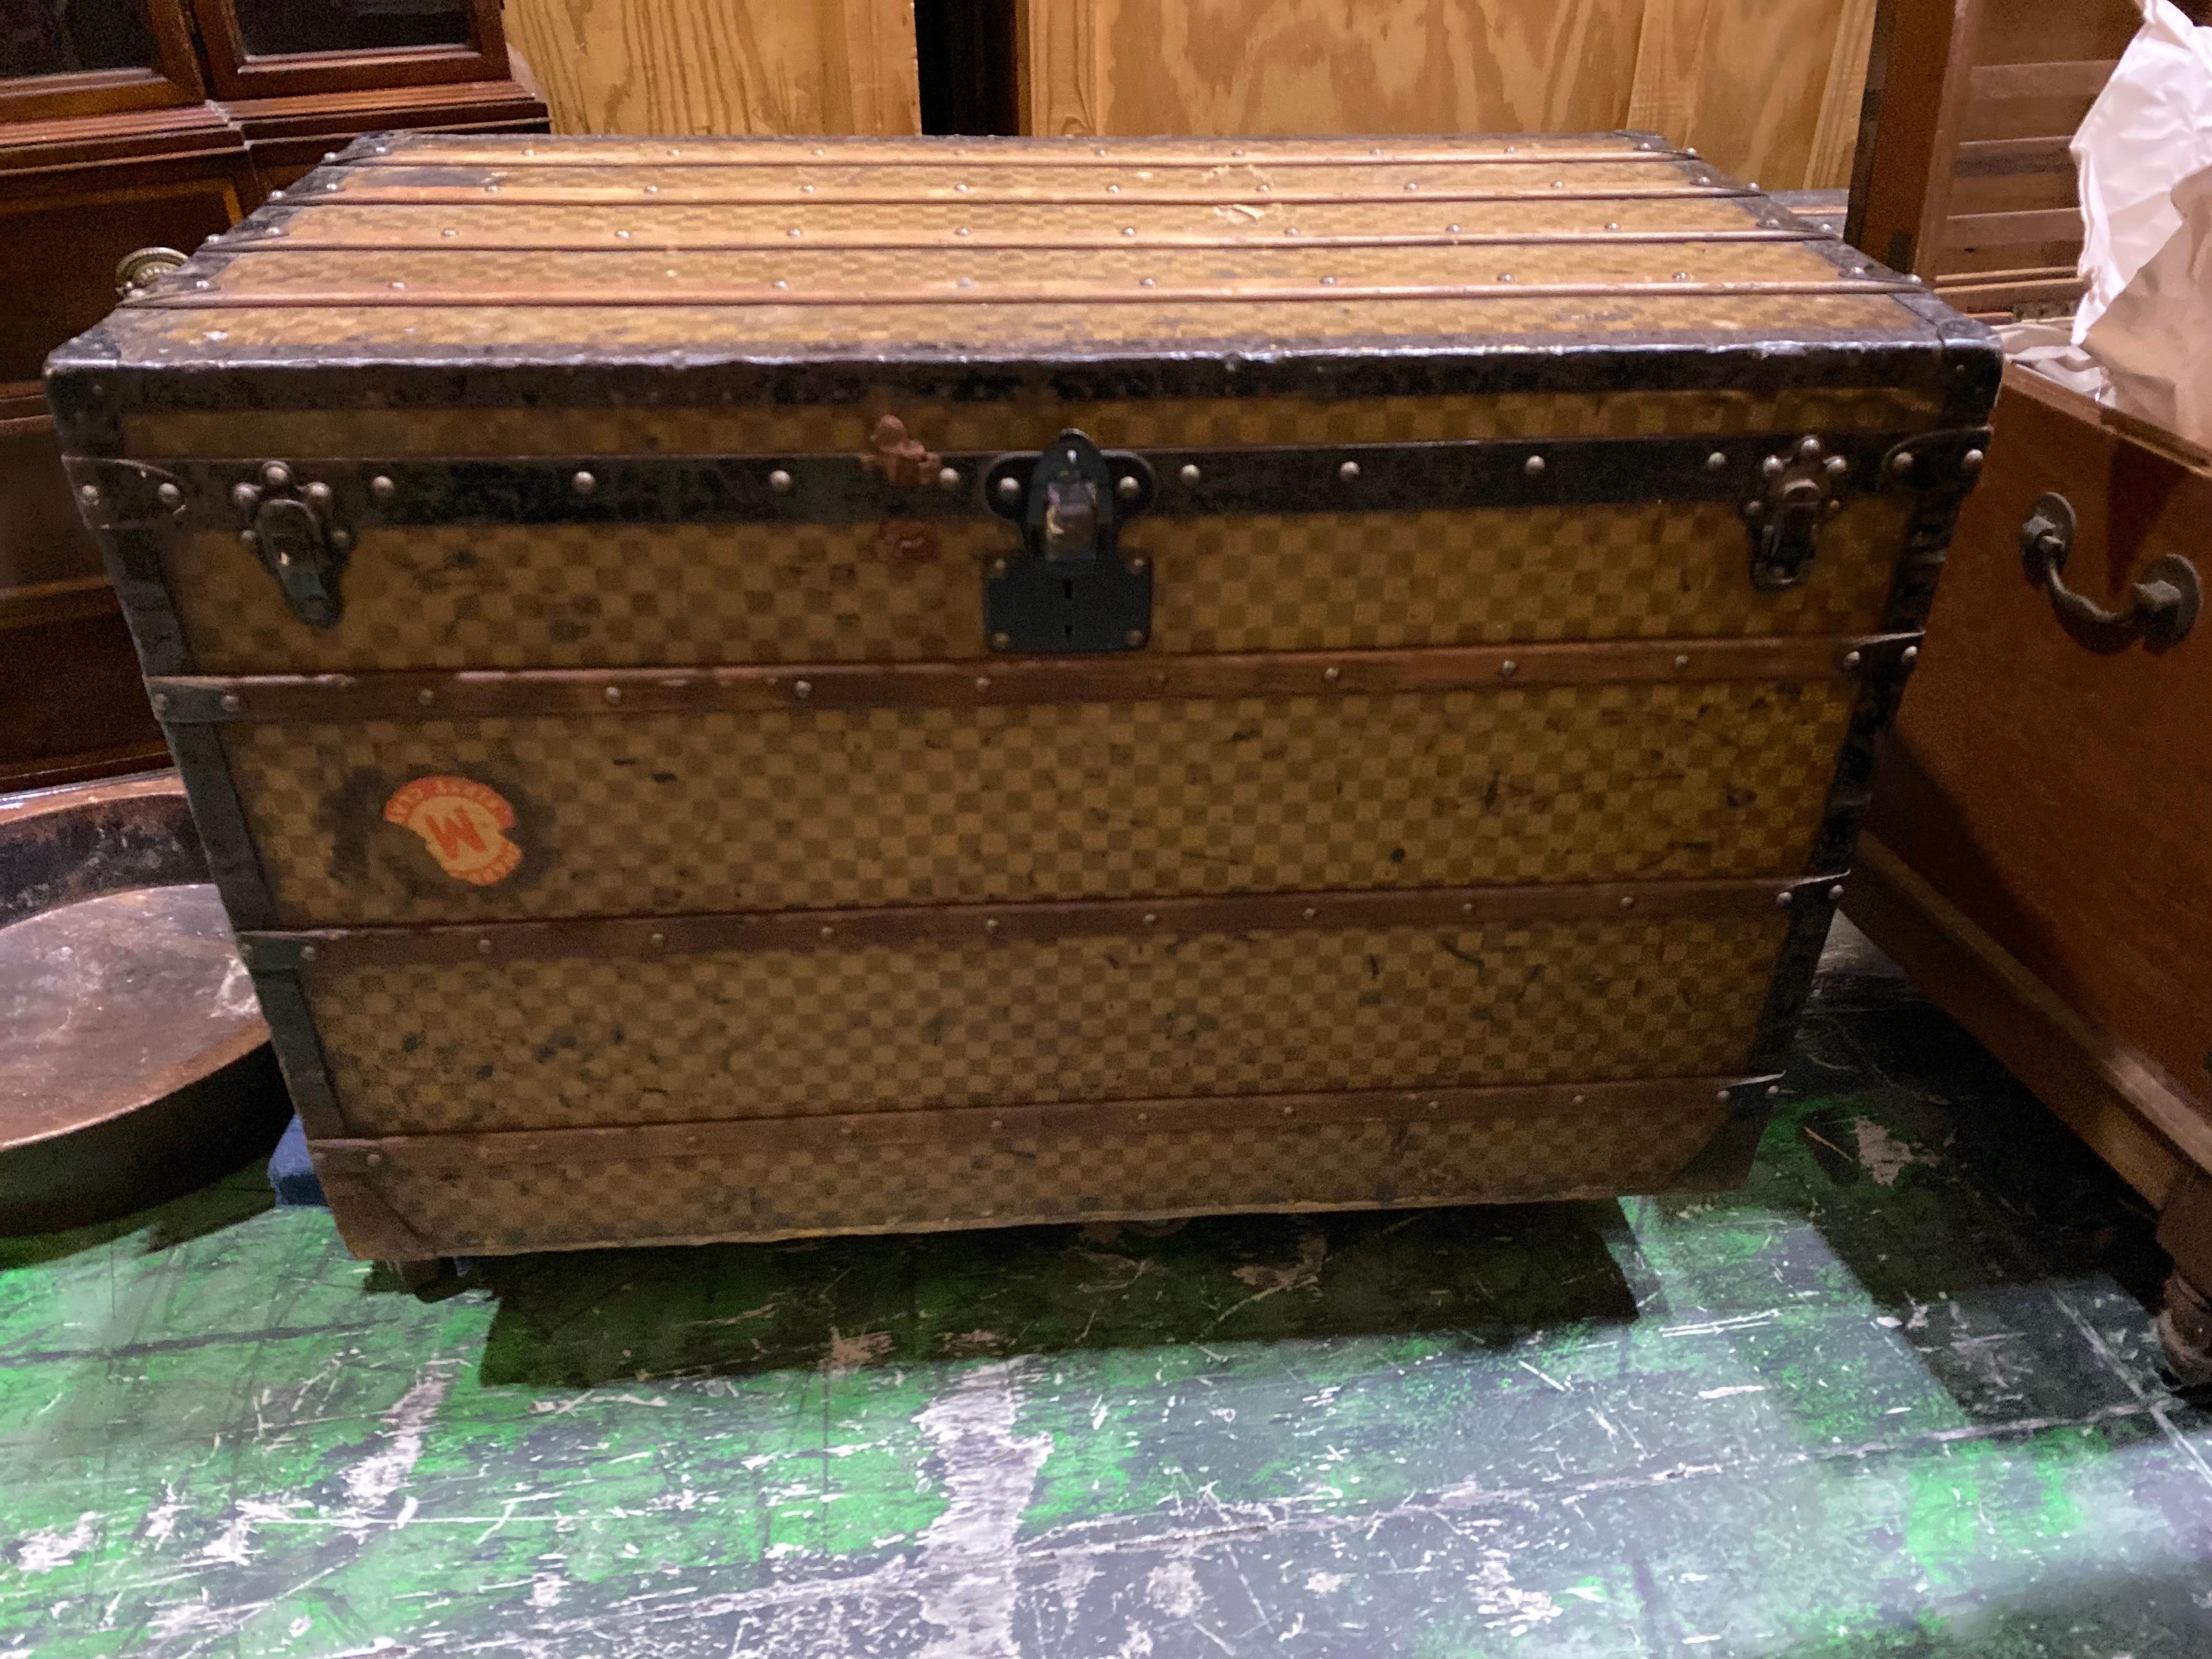 Sold at Auction: NEW YORK OVERLAND STEAMER TRUNK, RESTORED